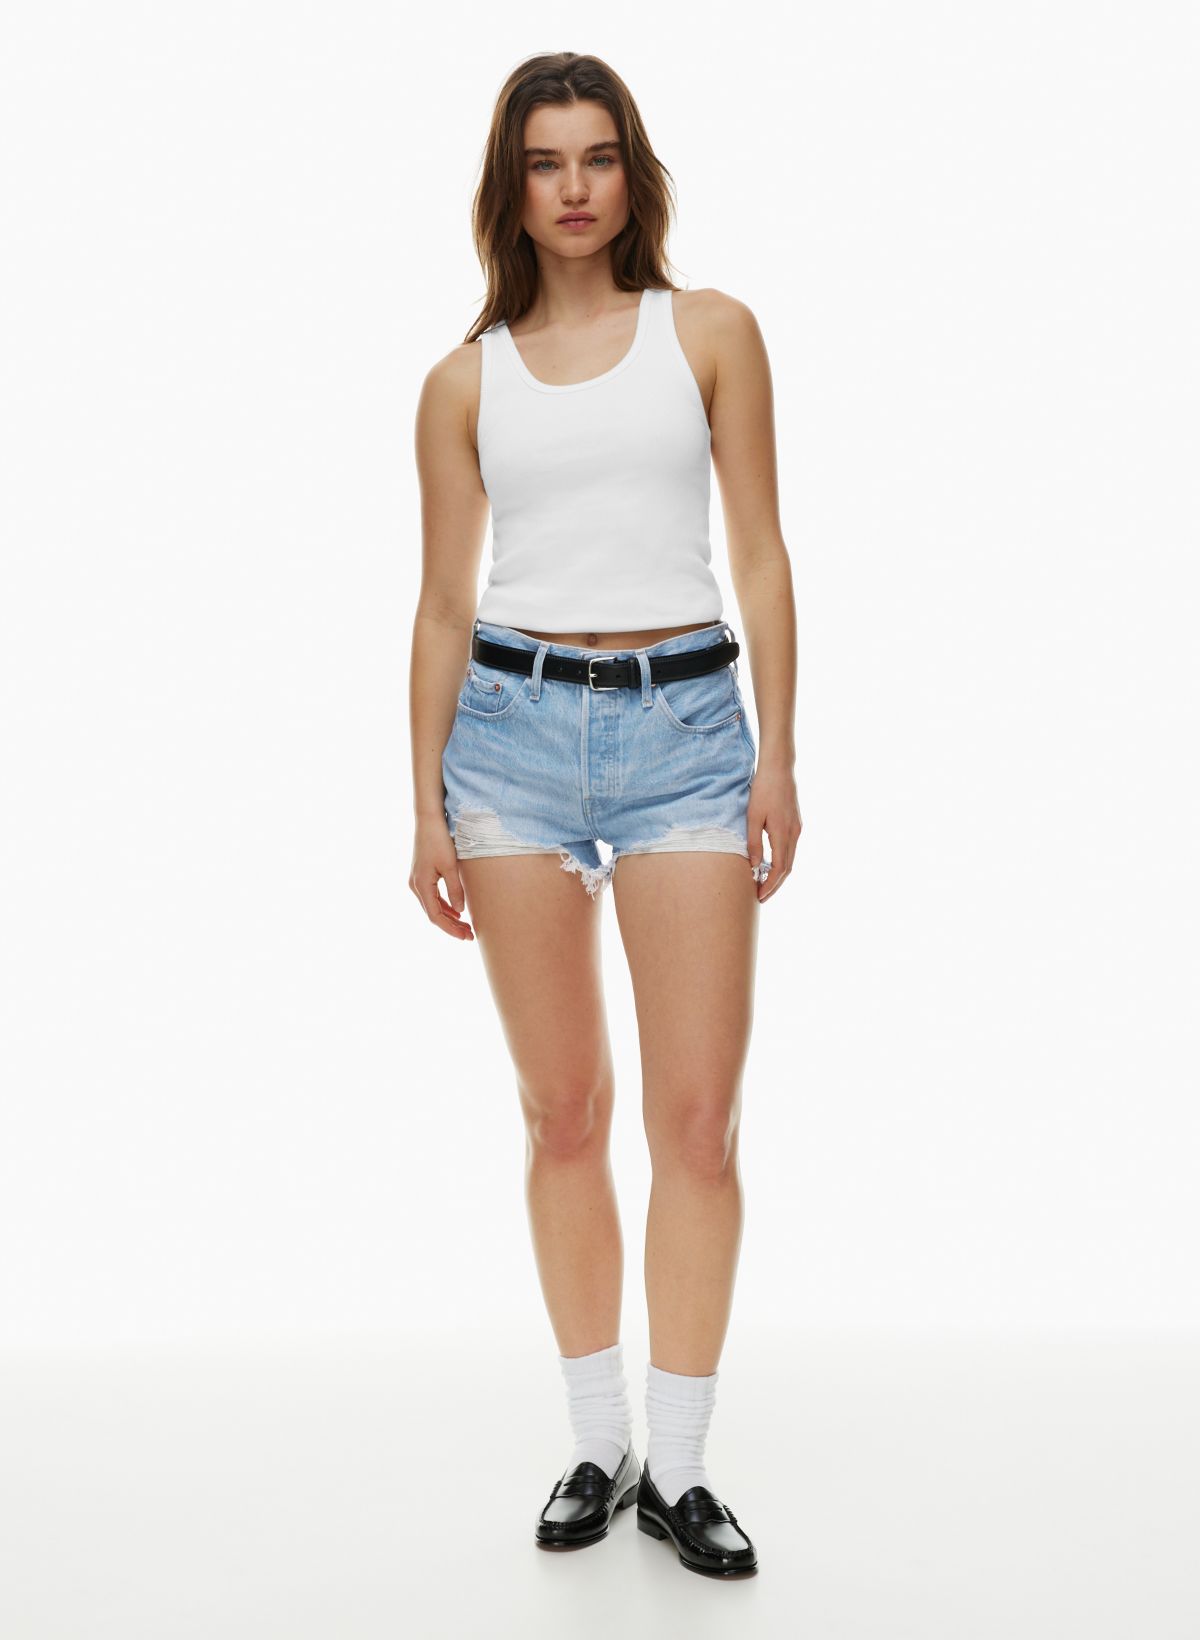 Levi's® 501 Button Fly Mid Thigh Distressed Denim Shorts